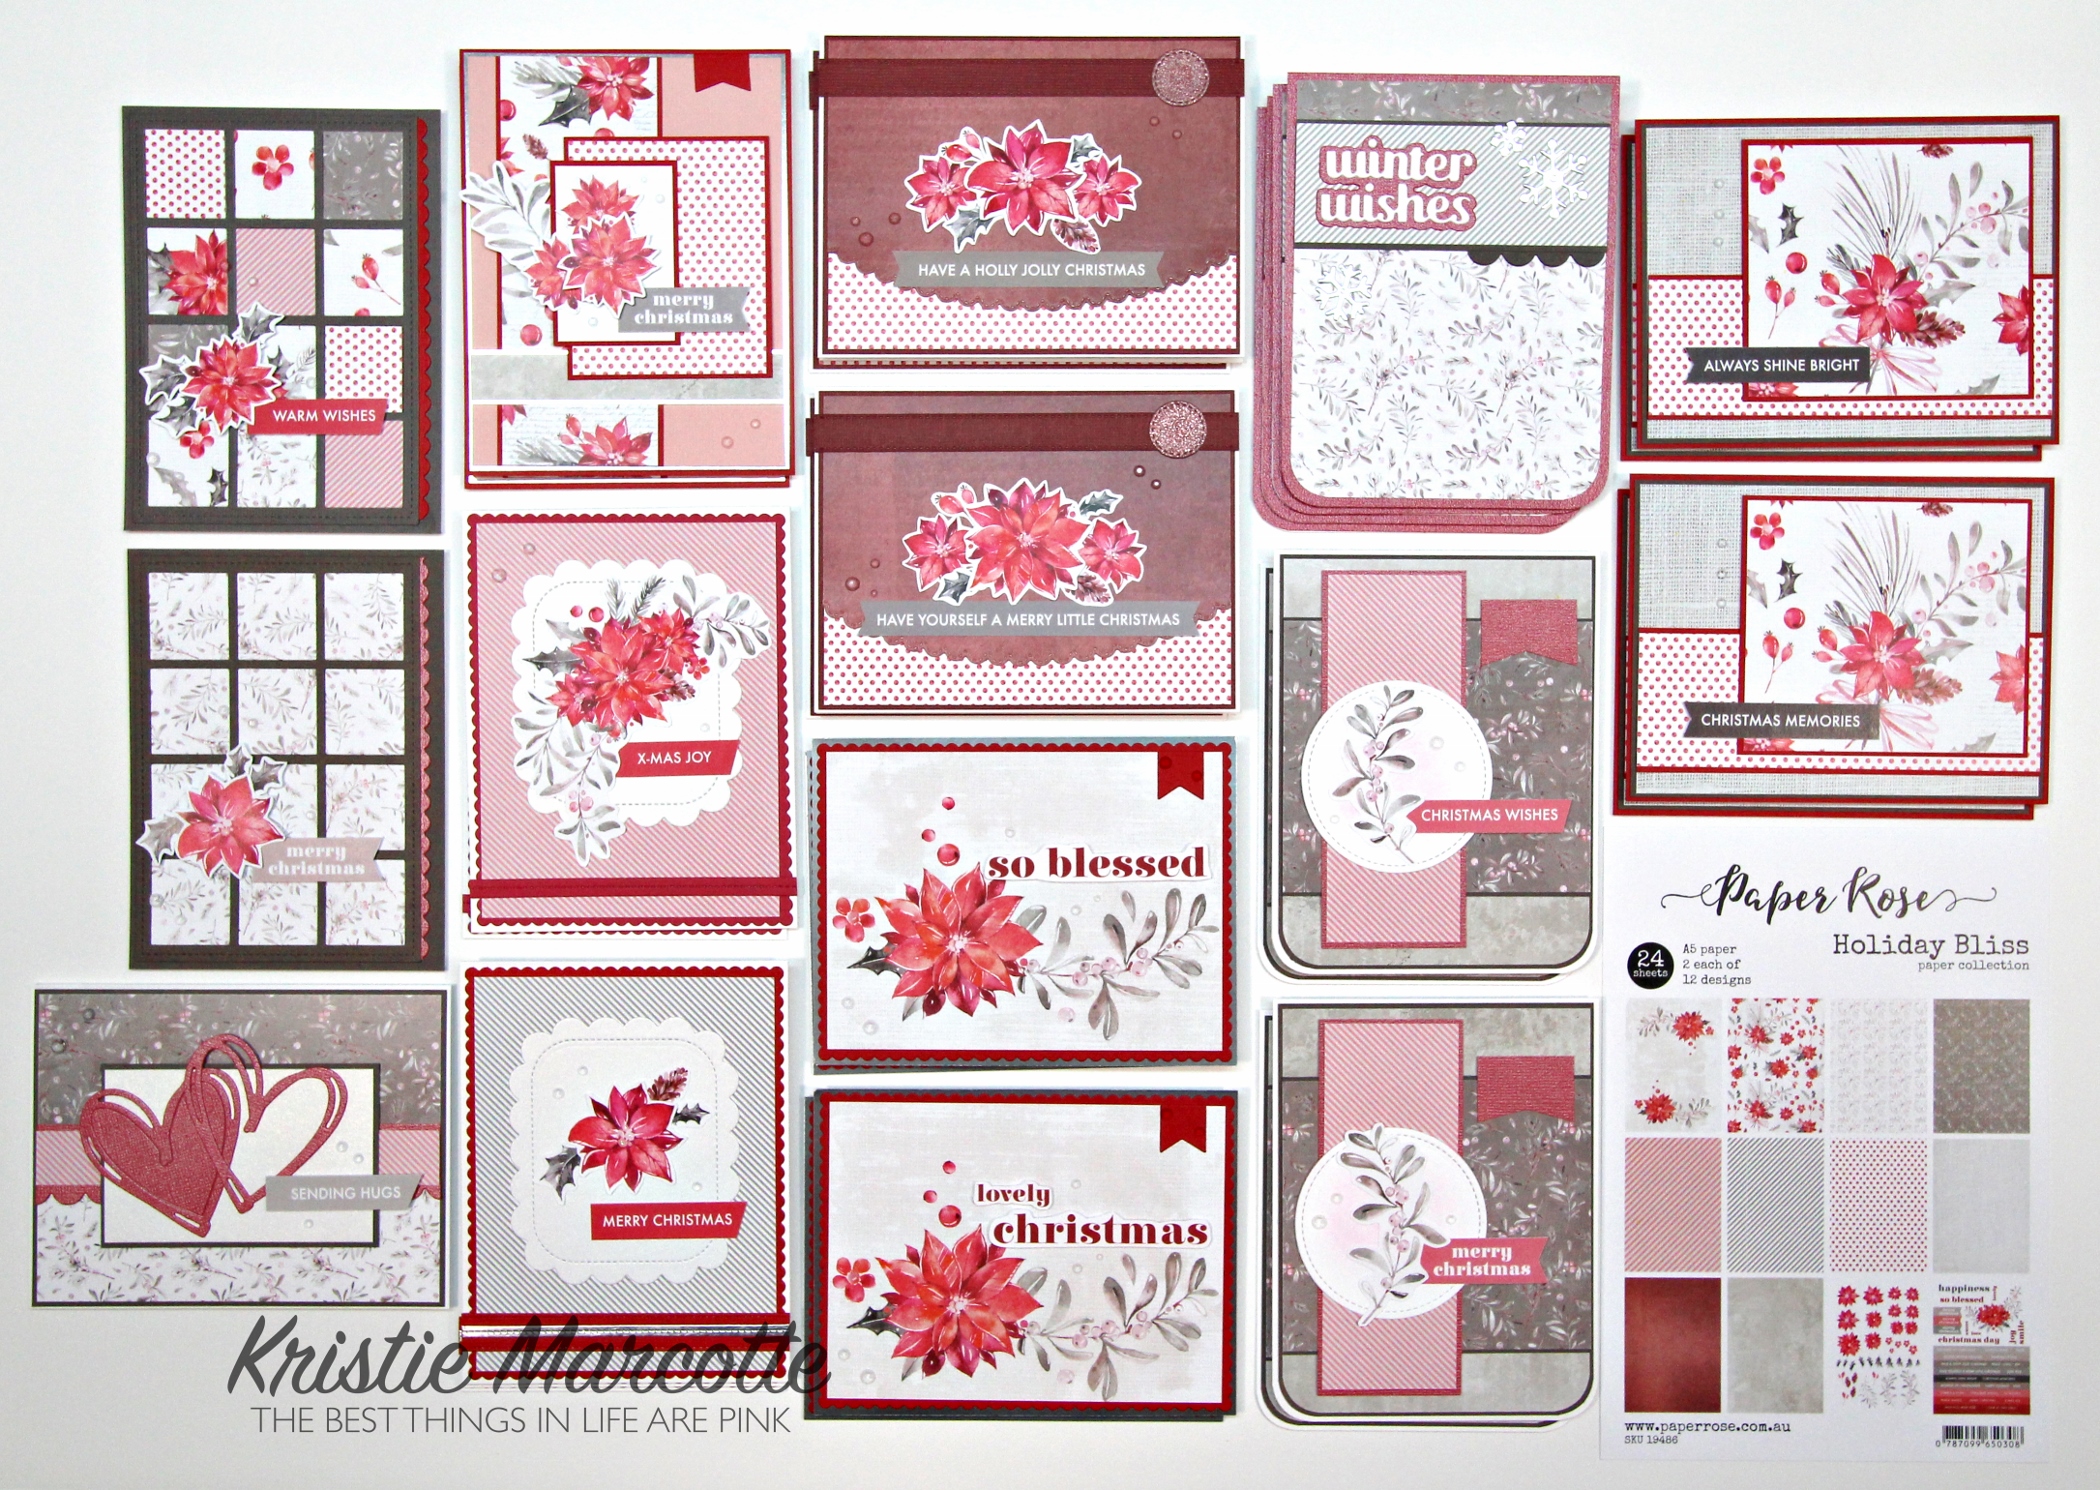 Paper Rose – Holiday Bliss – 30 cards from one paper pack